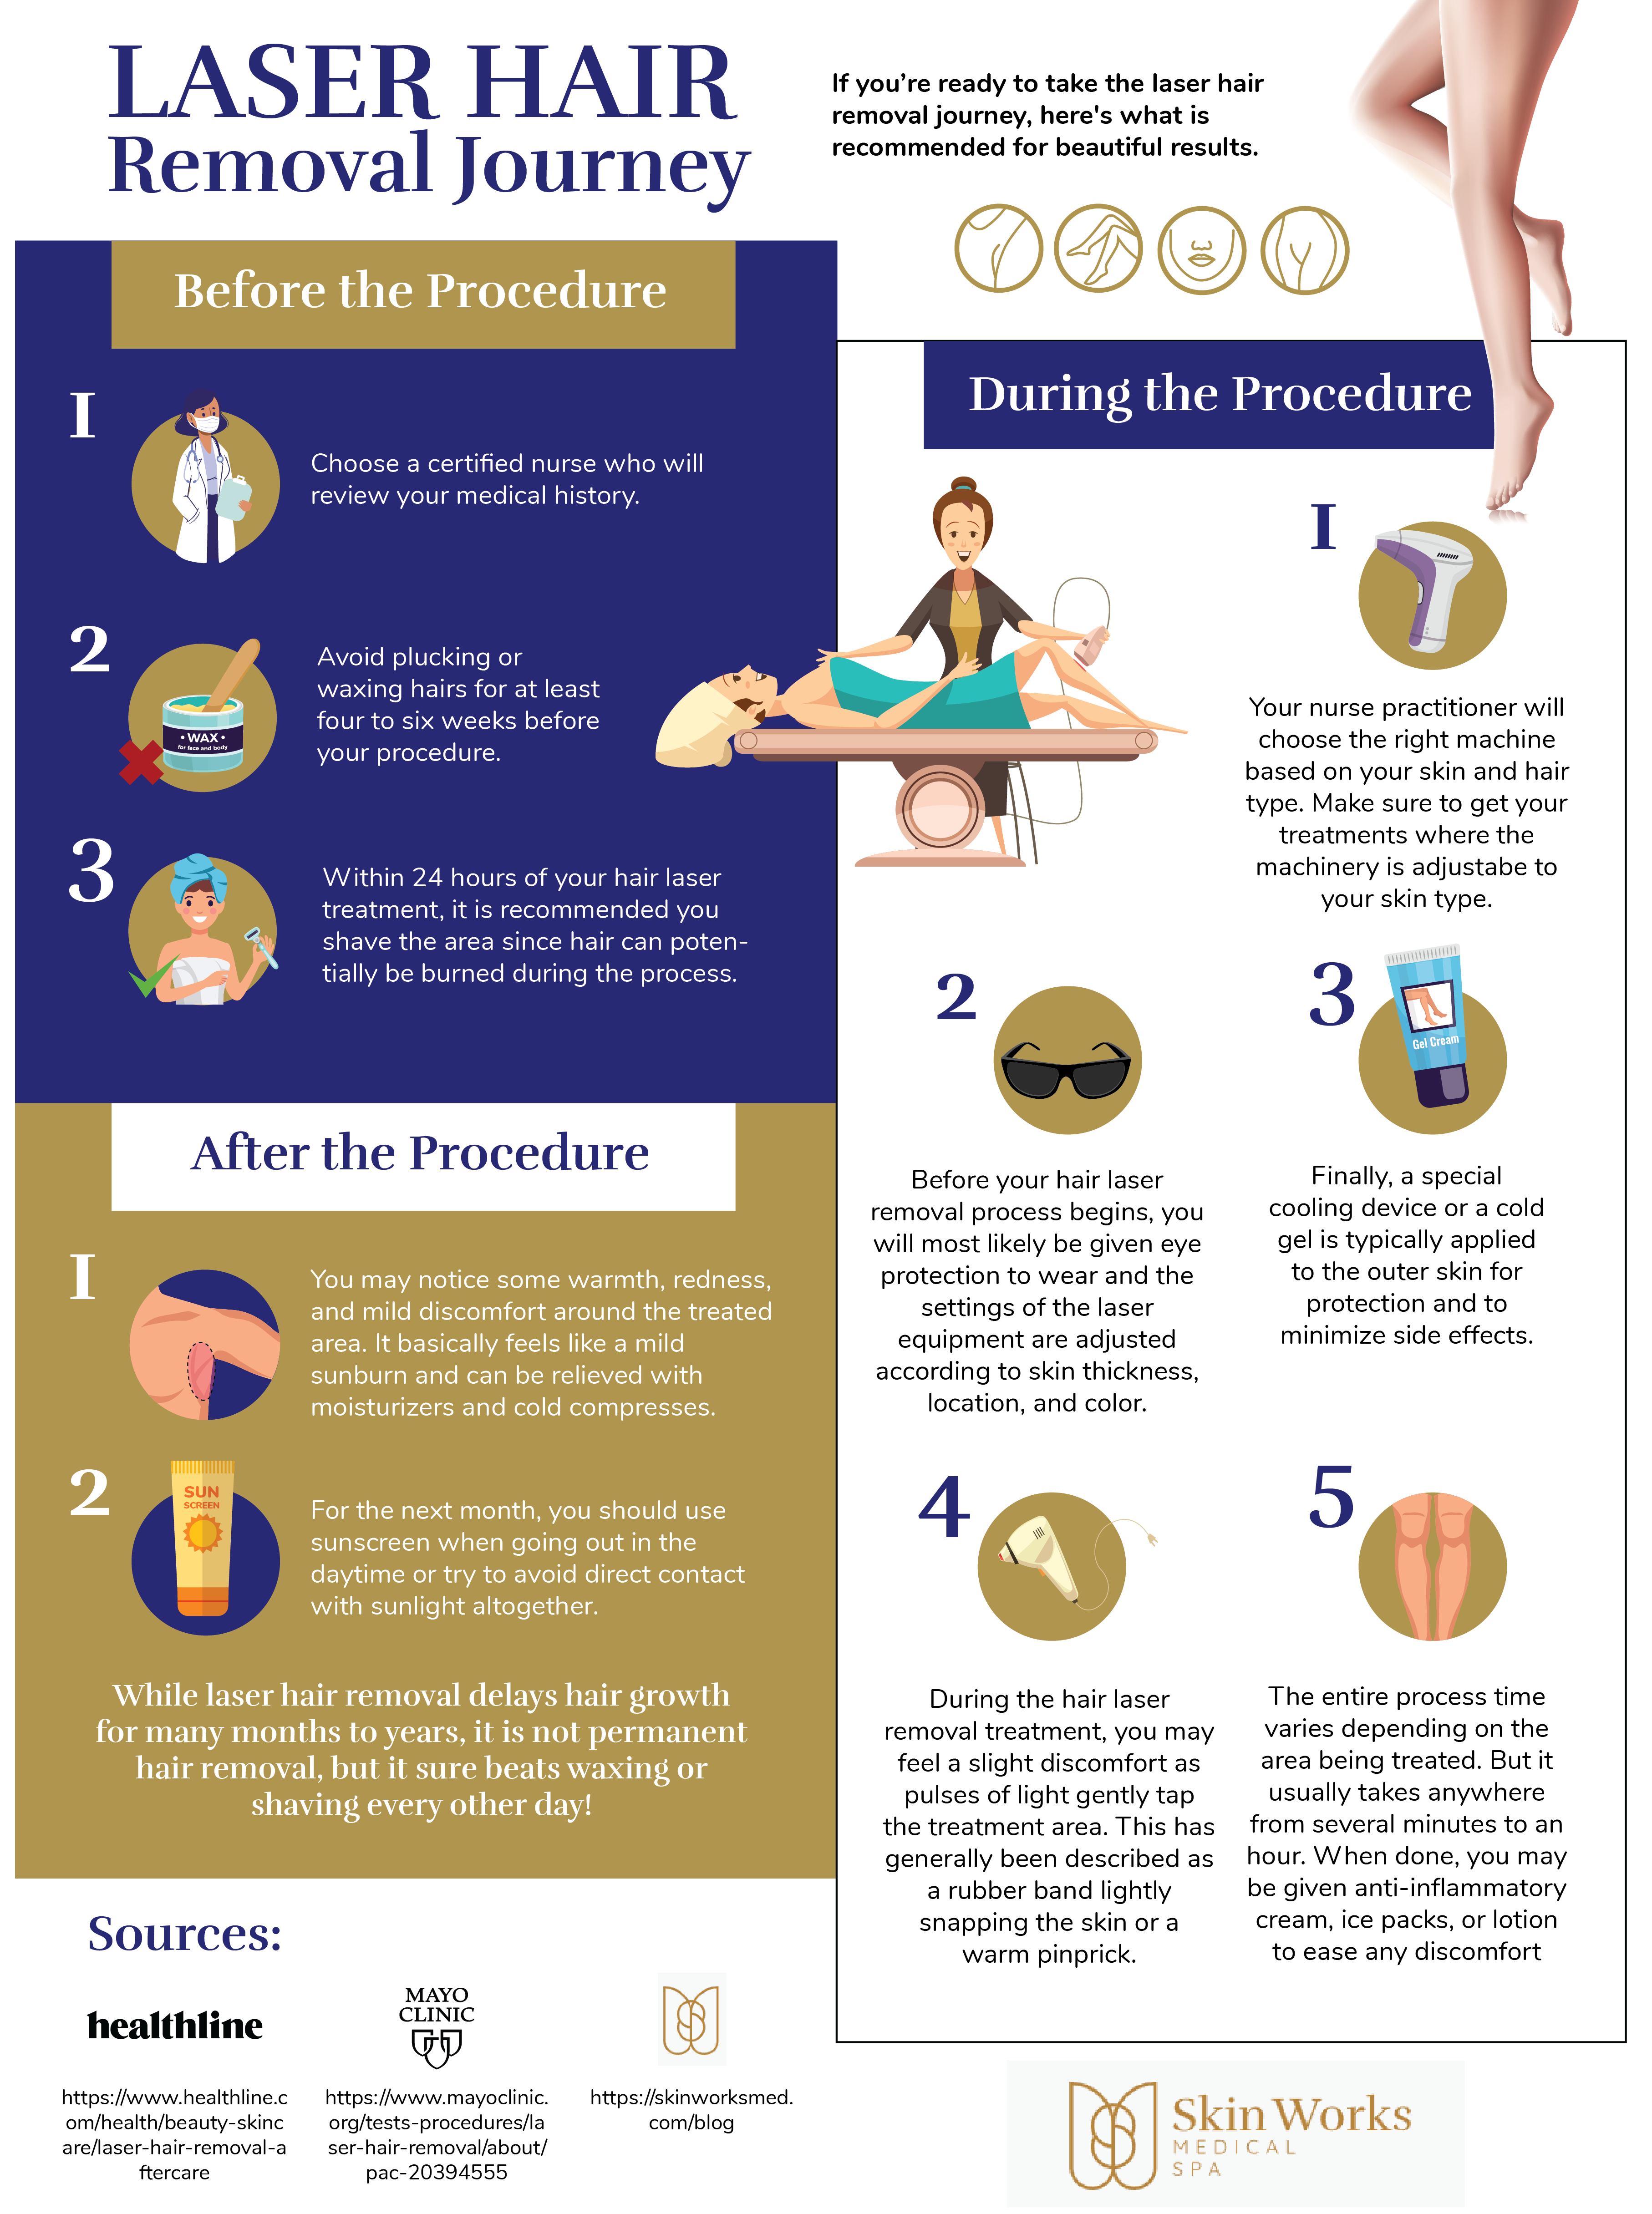 laser hair removal infographic